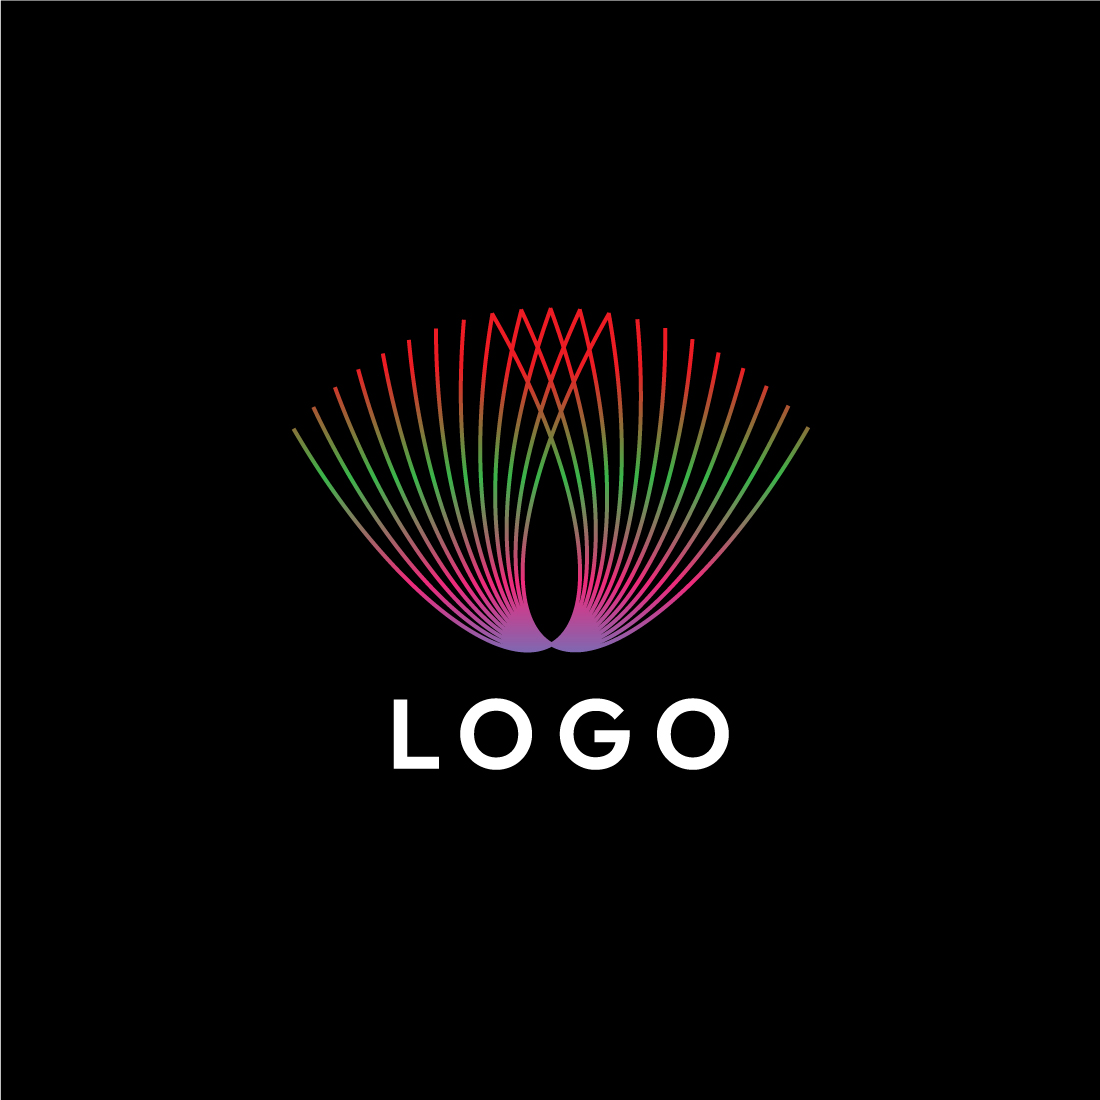 Sleek Line Art Logo Design Bundle: Elevate Your Brand with Timeless Graphics cover image.